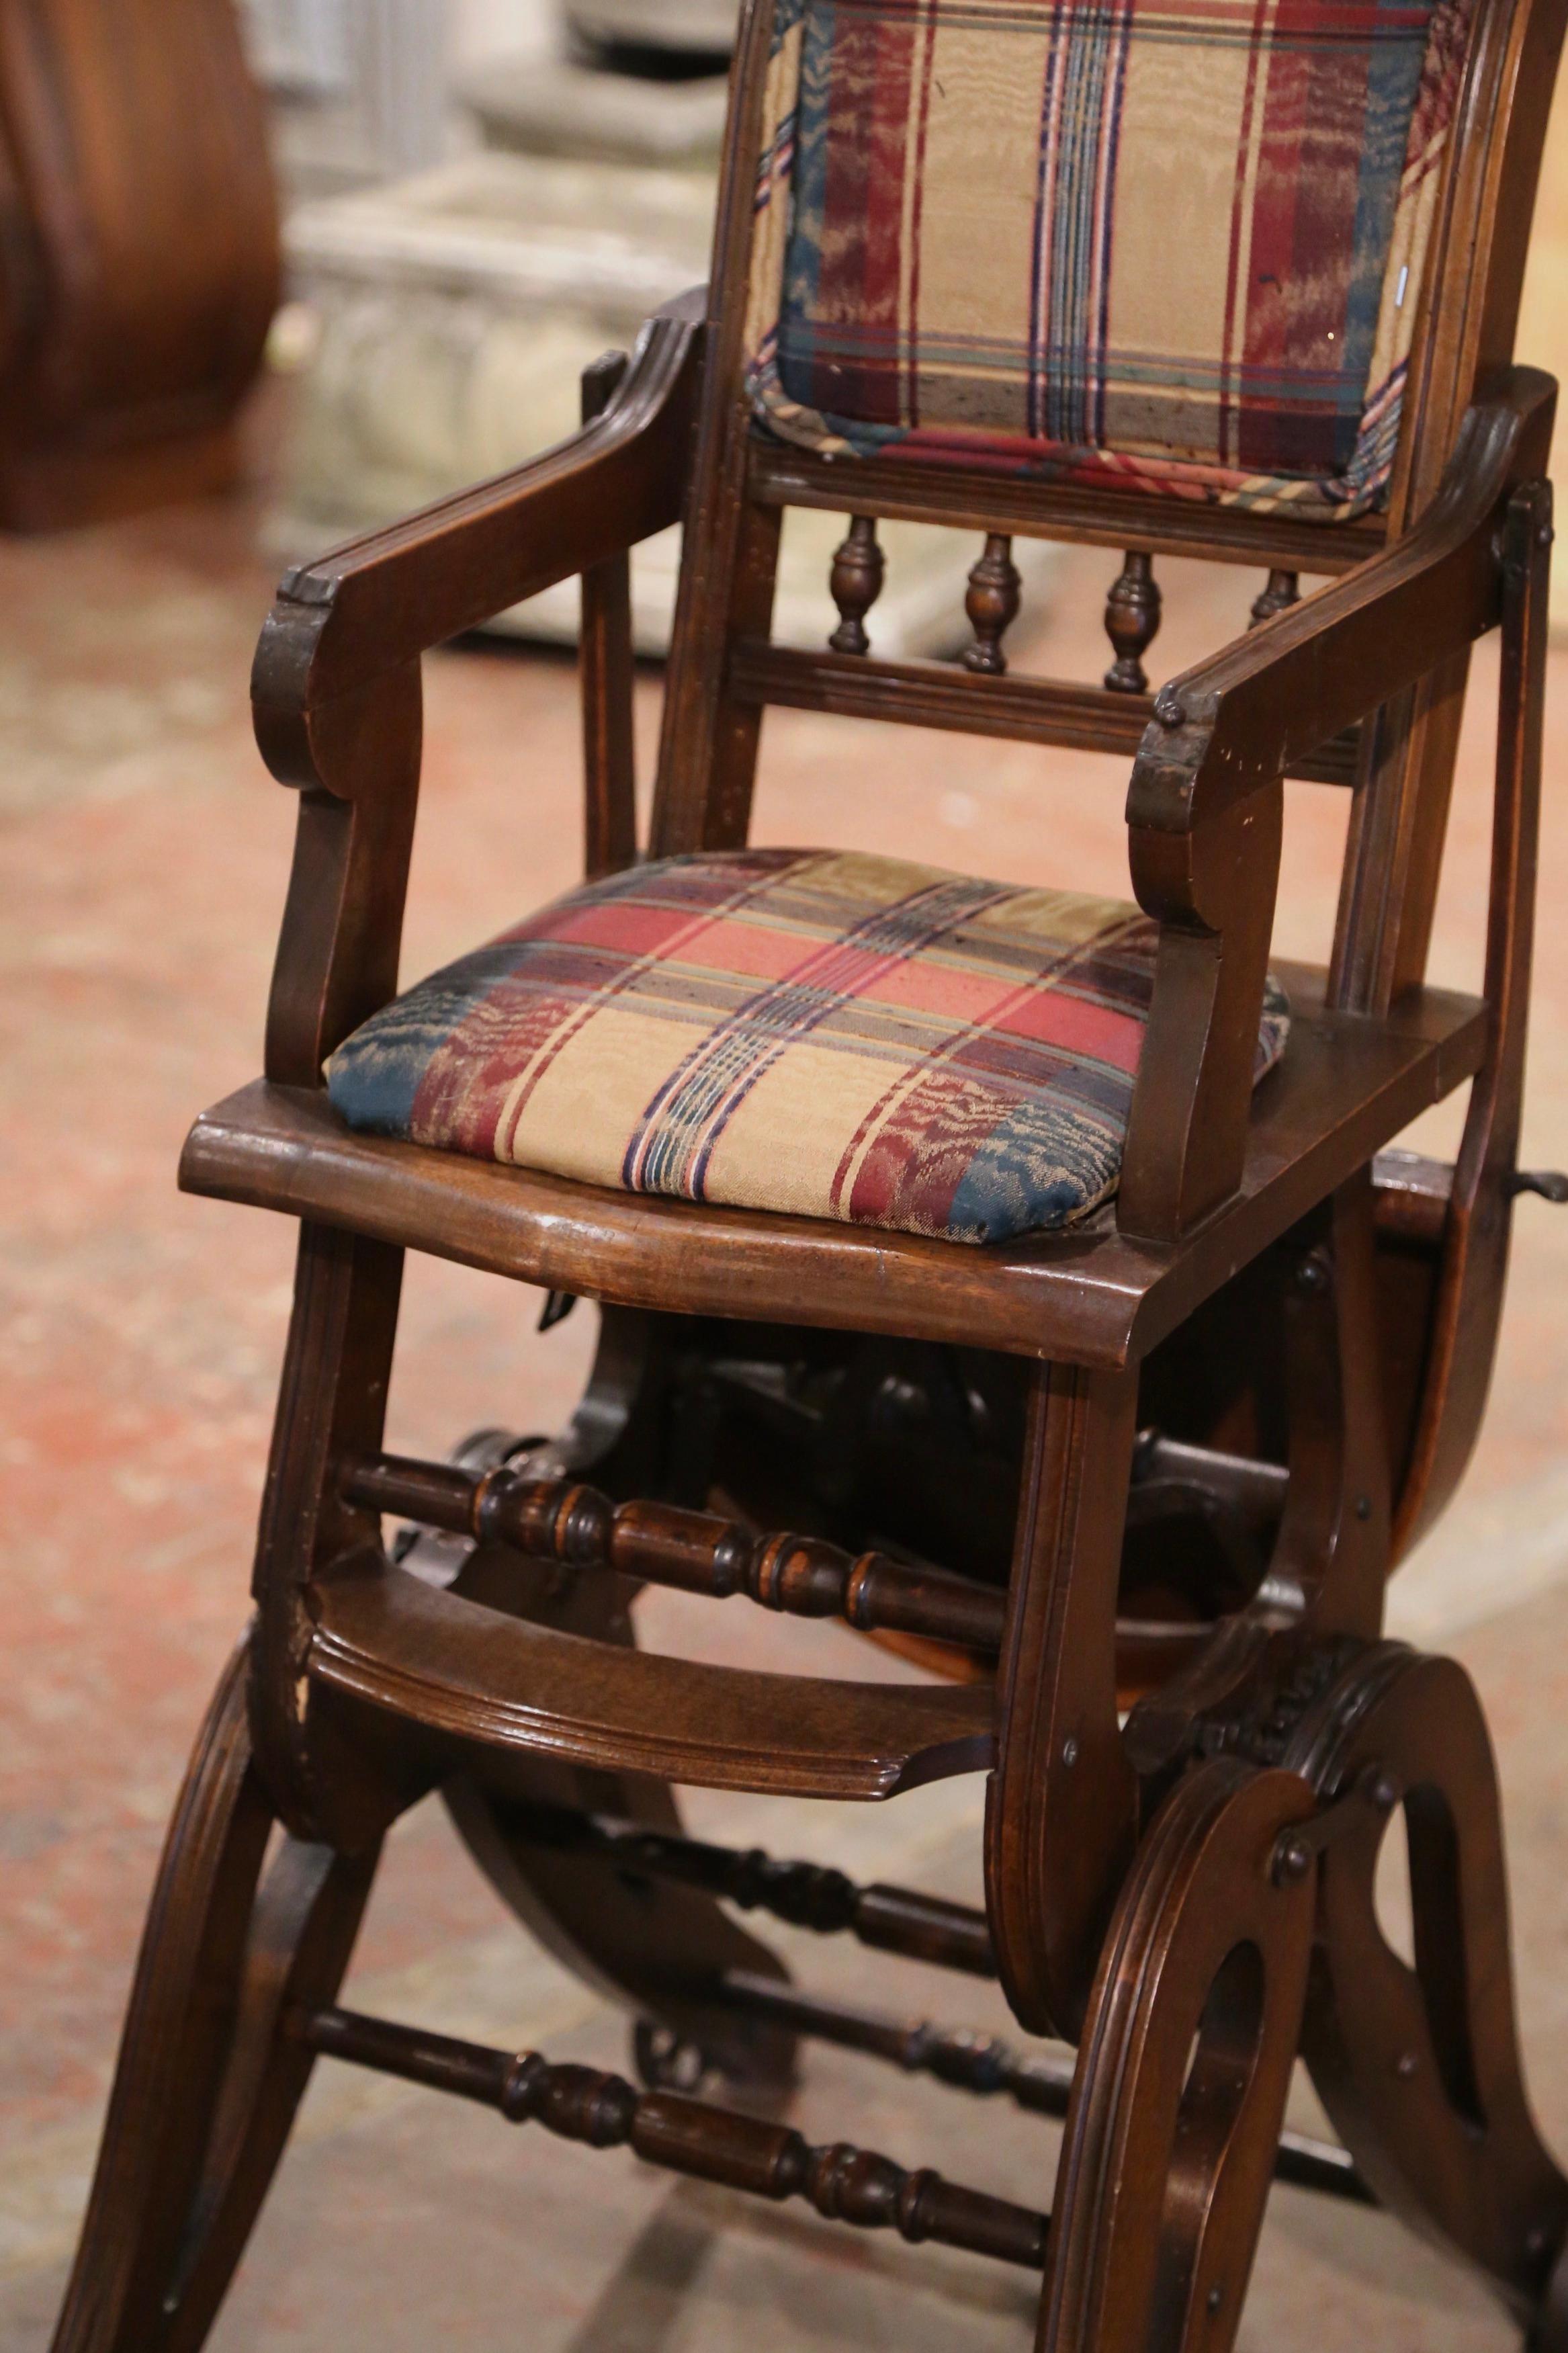 19th Century English Carved Walnut and Fabric Convertible High Chair to Rocker In Excellent Condition For Sale In Dallas, TX